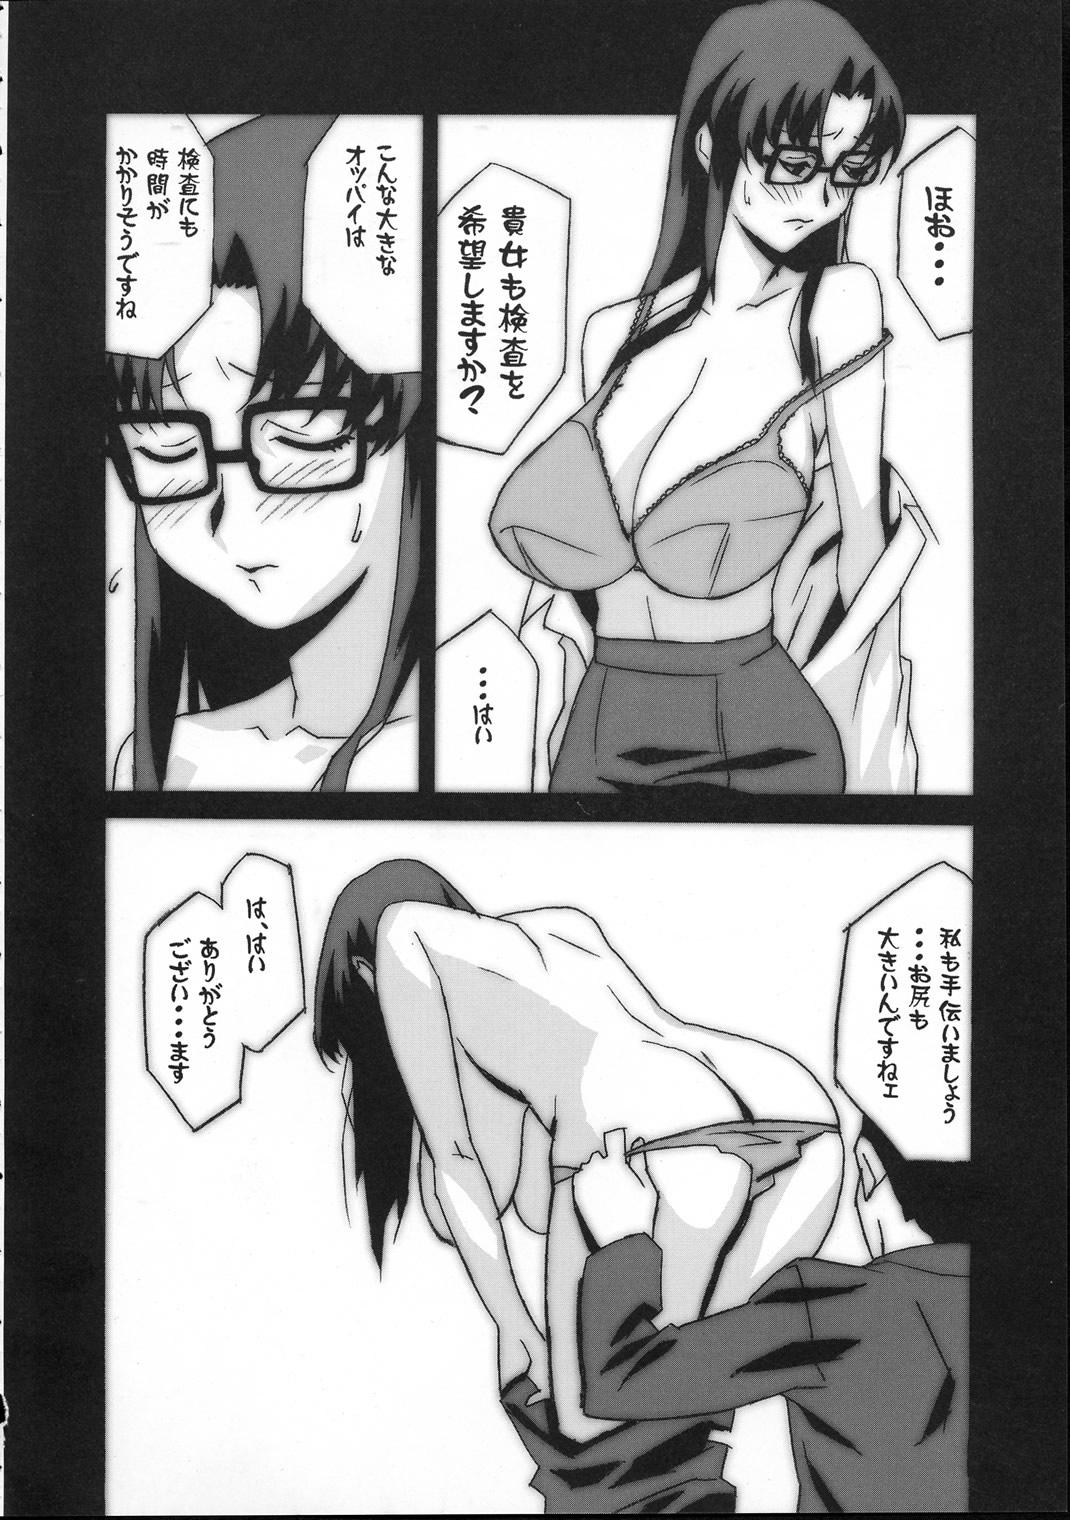 Domination Gunyou Mikan 17 - Read or die Body Massage - Page 11